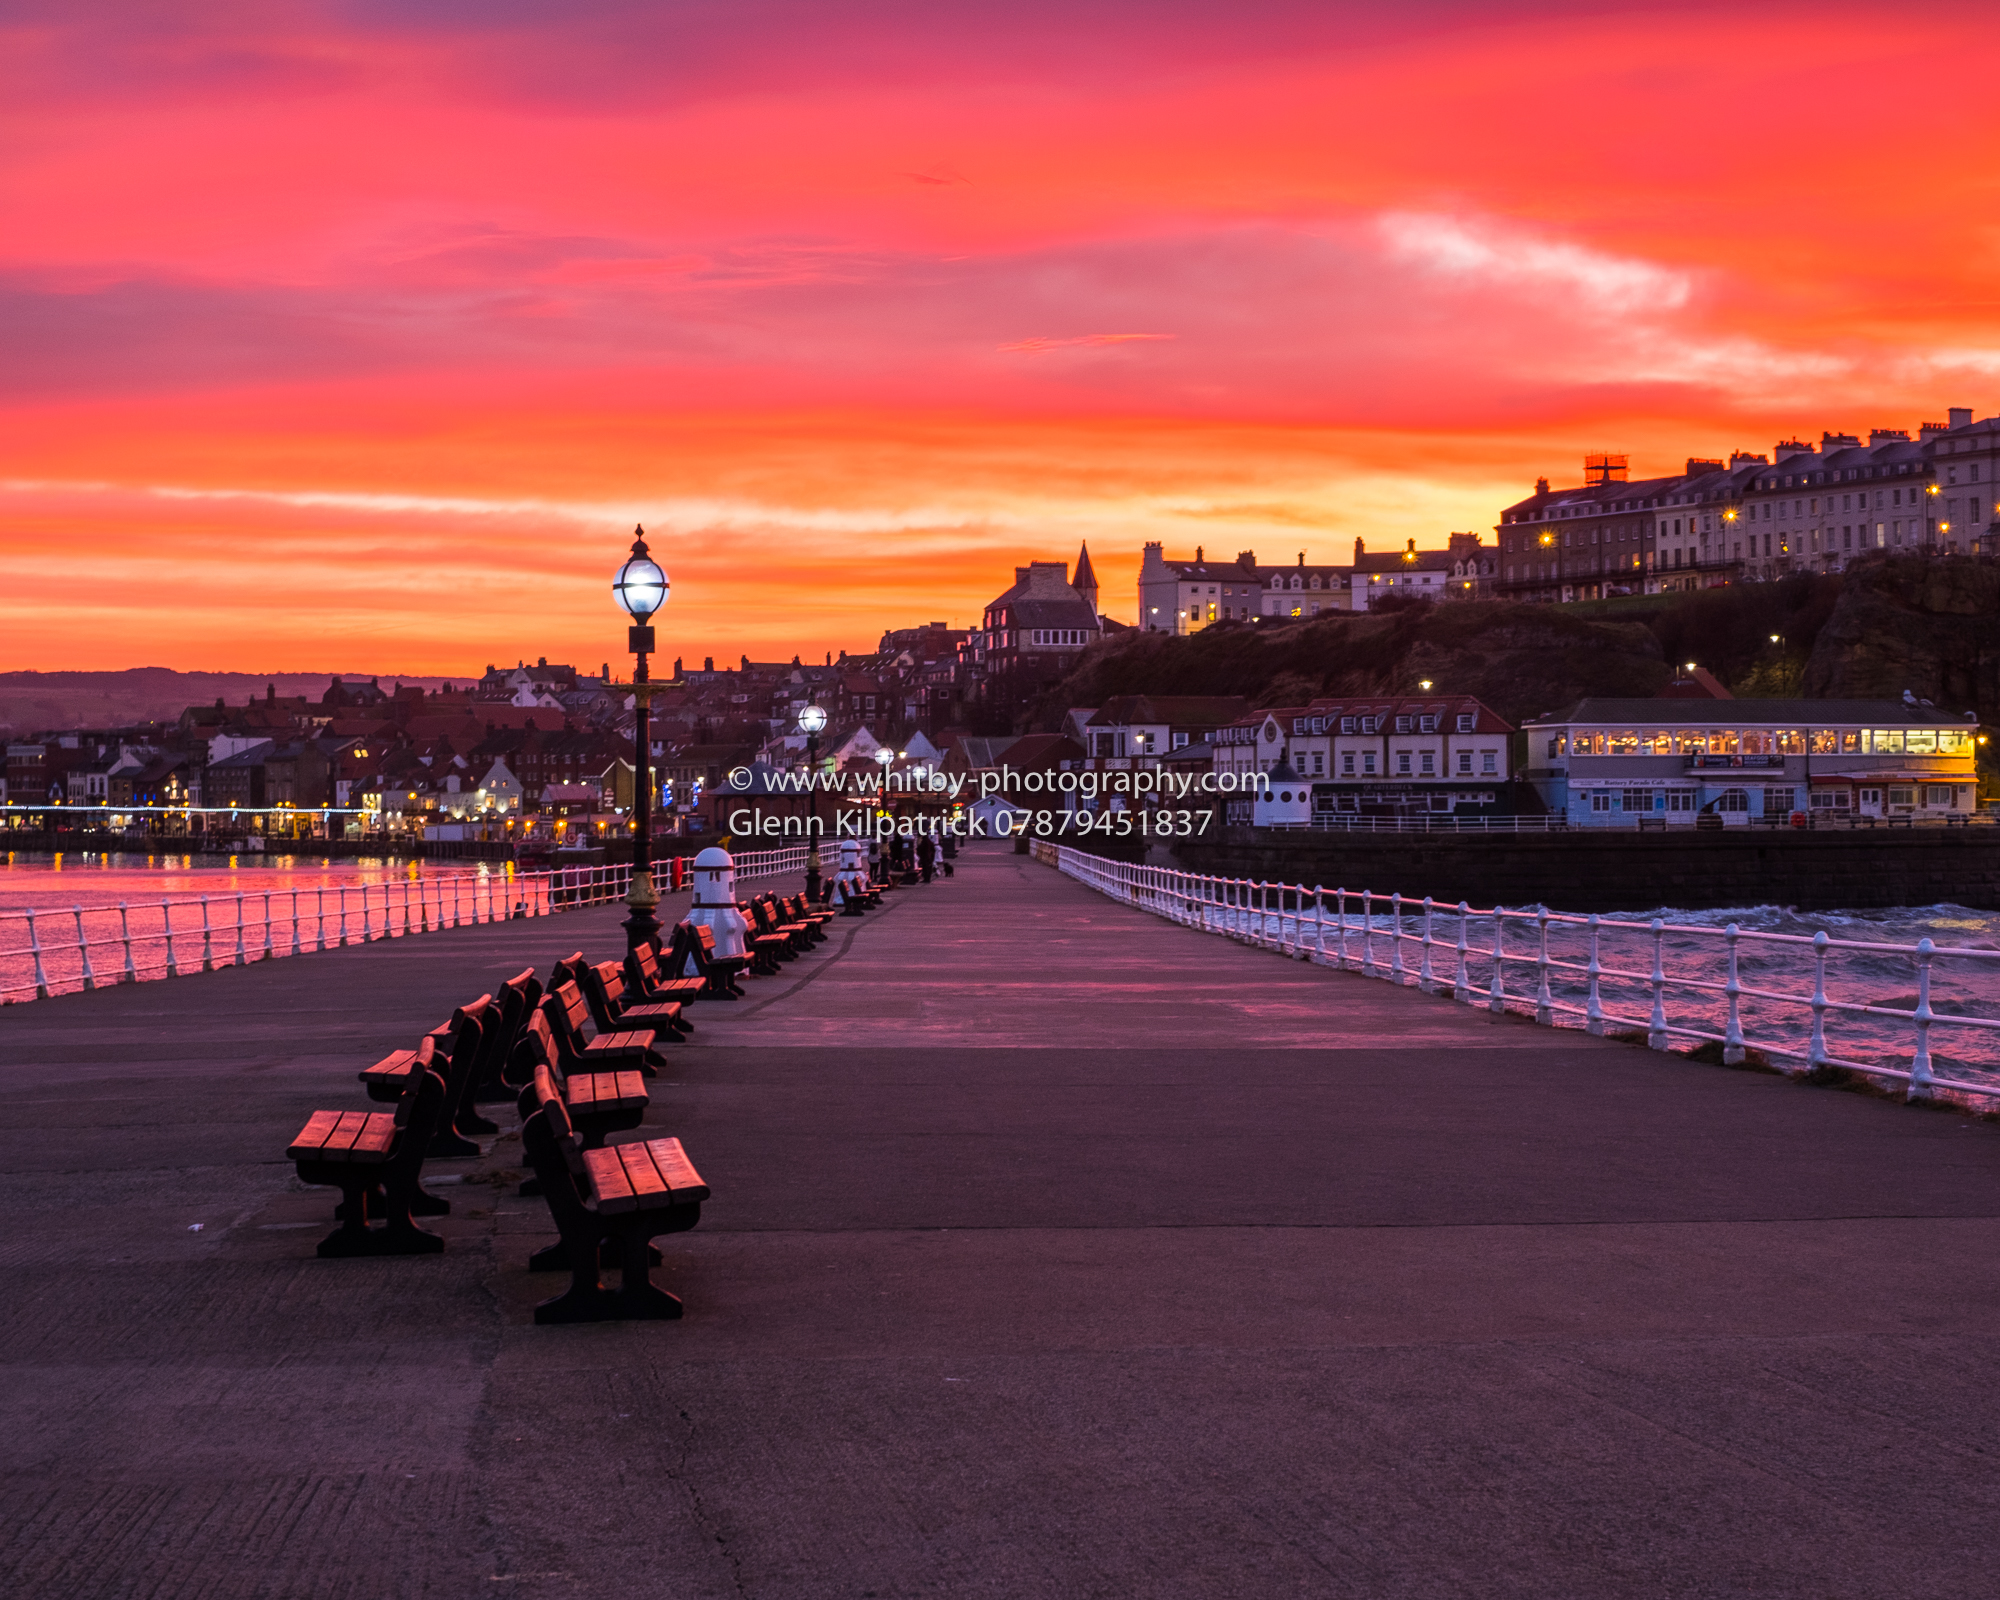 A Vivid Winter Sunset At Whitby - Whitby Photography